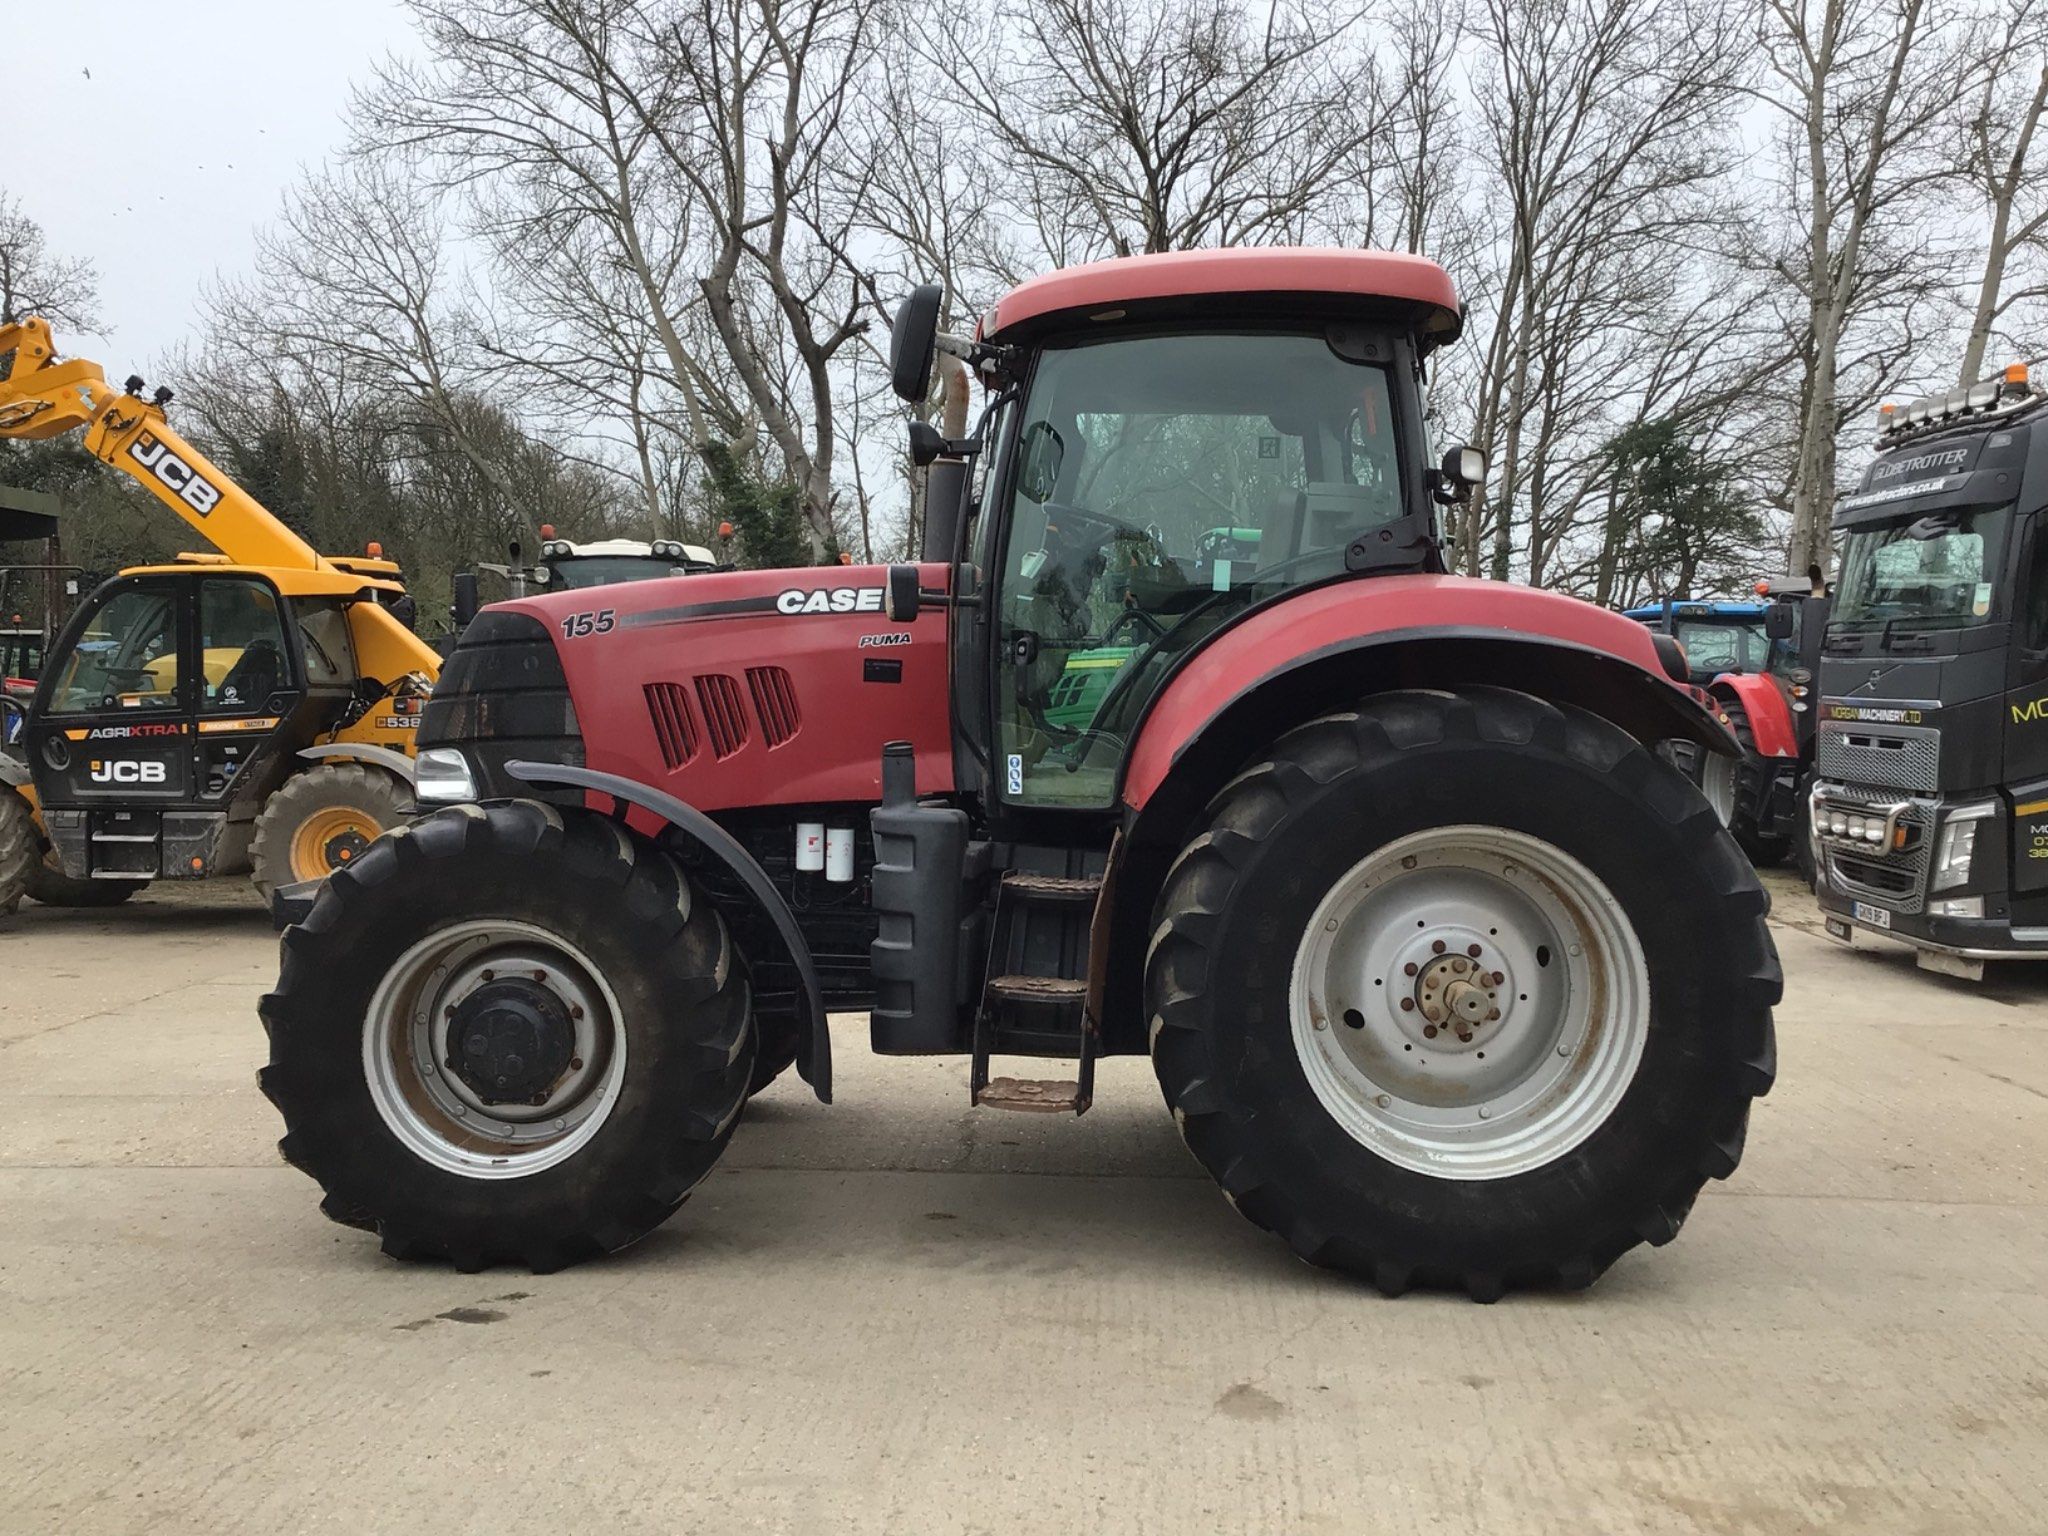 2011 Case Ih 155 puma for sale for £27,950 in Maidstone, Kent